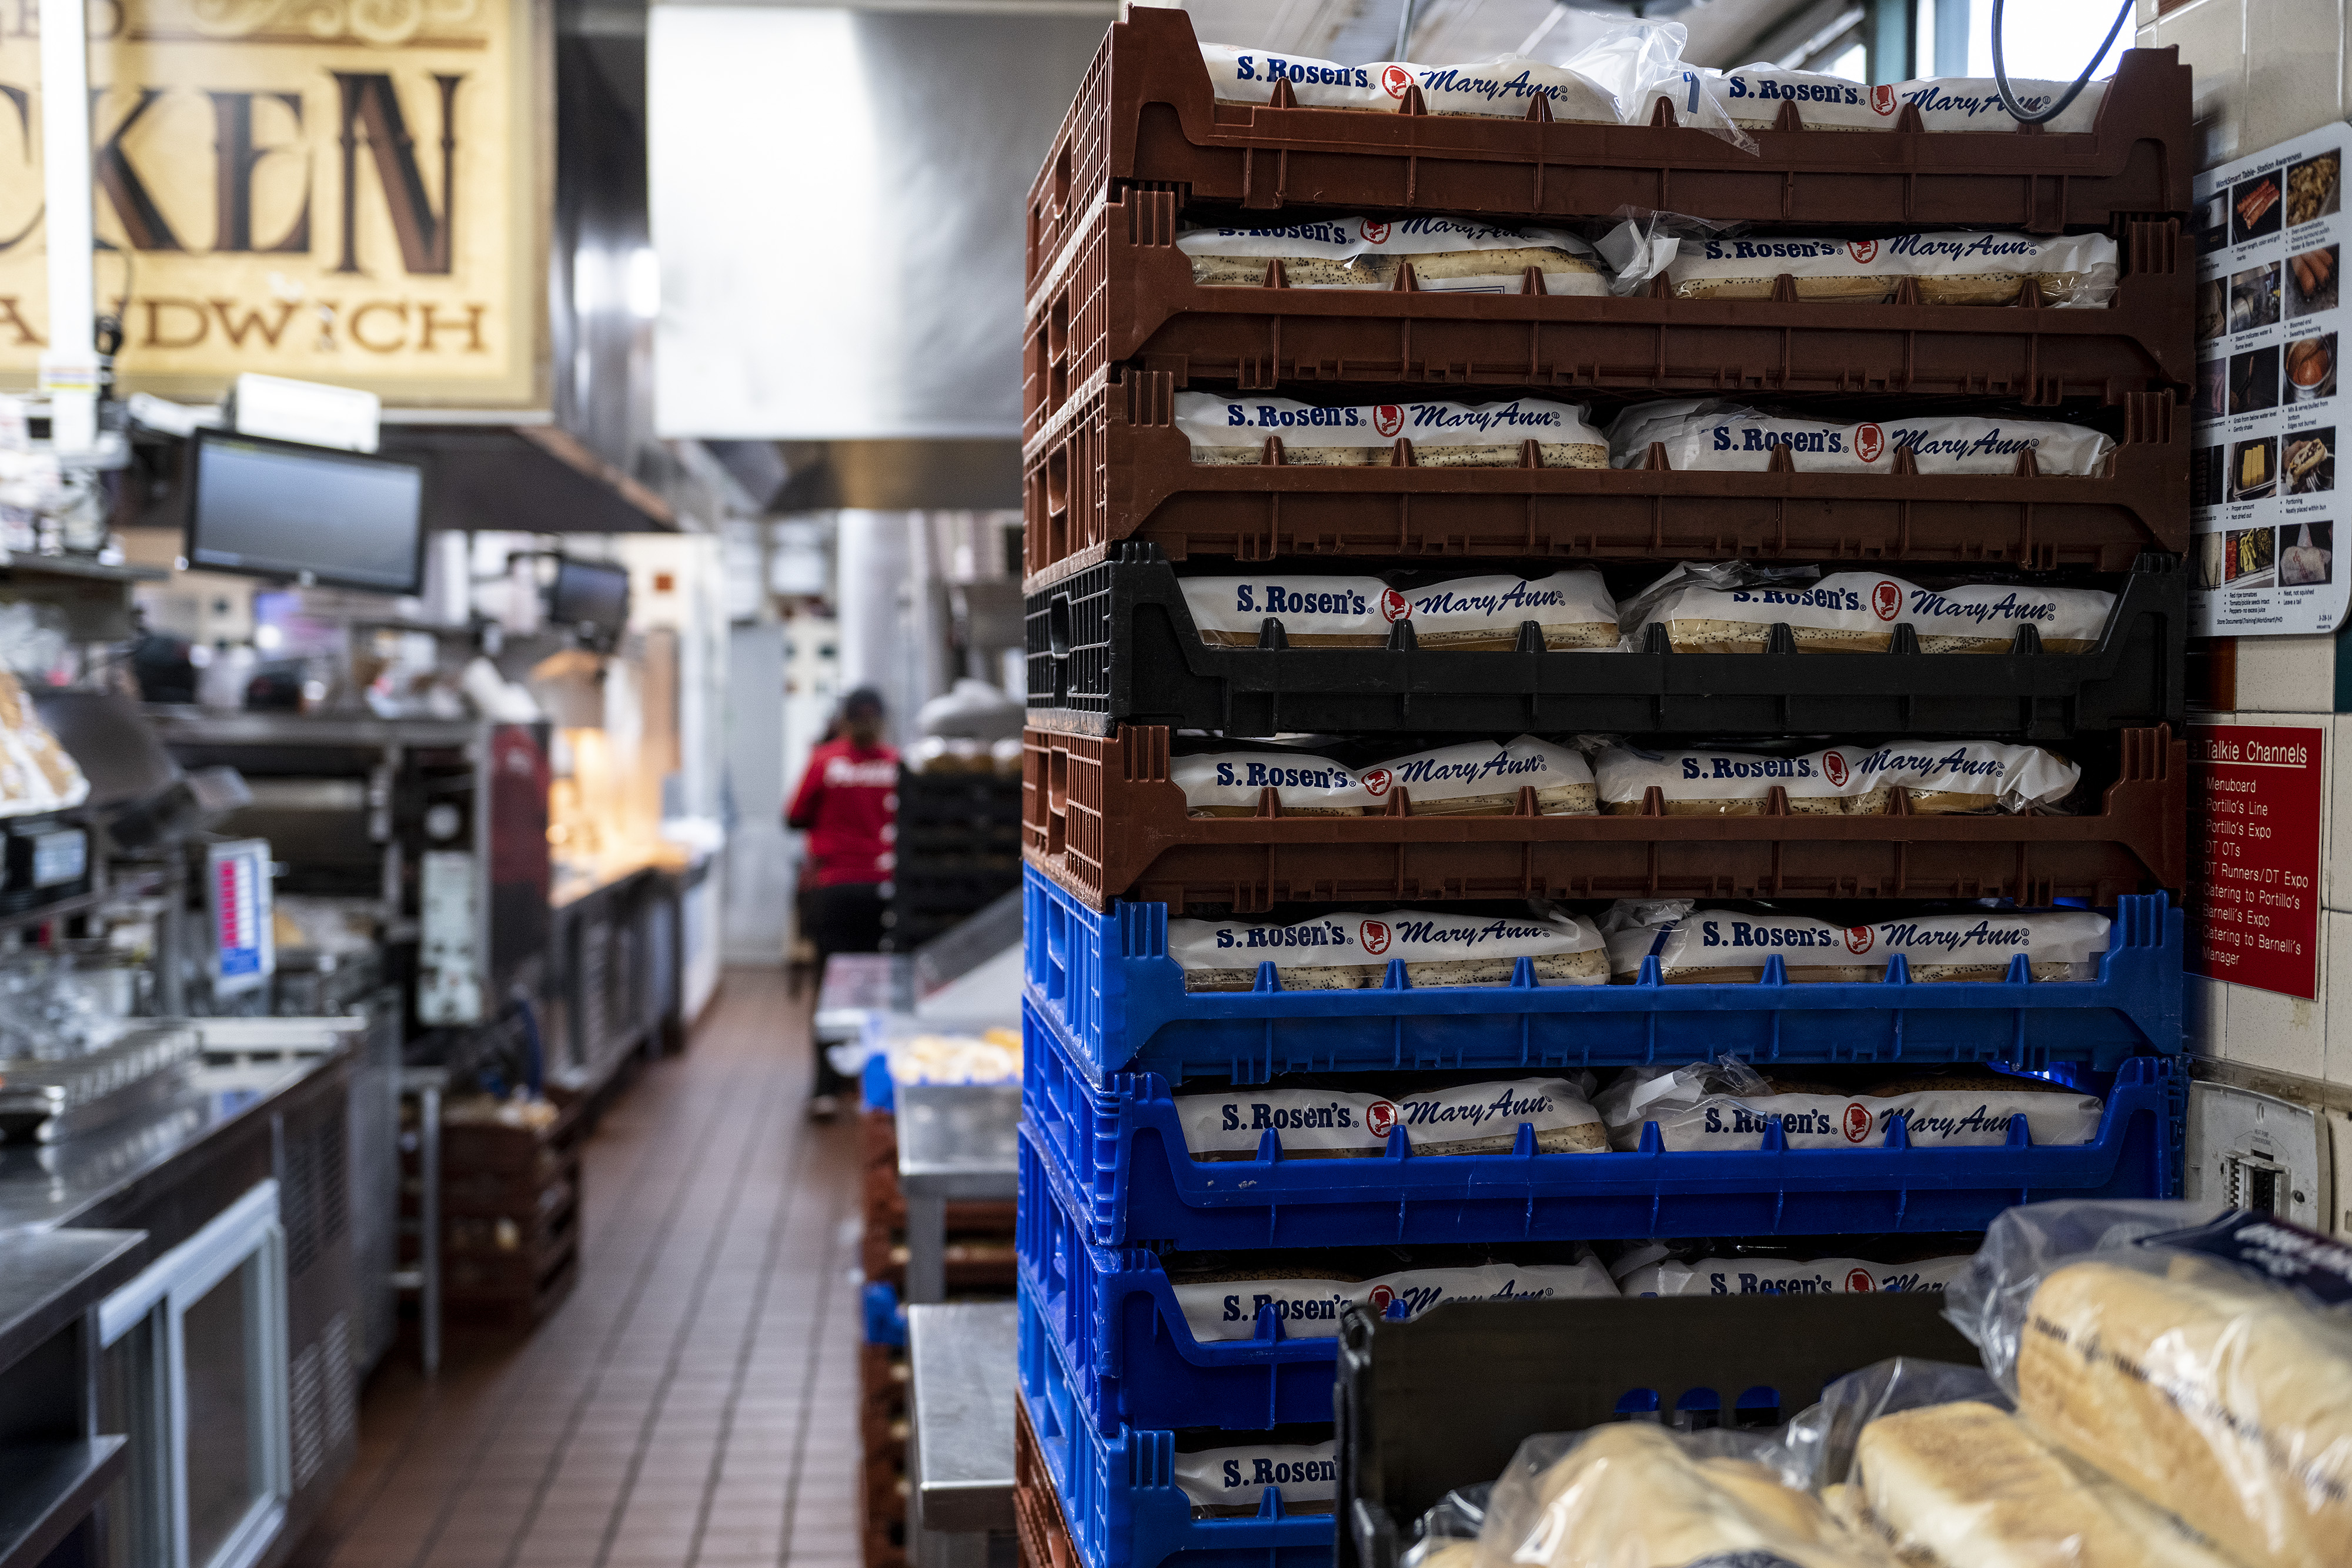 A stack of plastic trays holding bread is seen inside a grocery store.